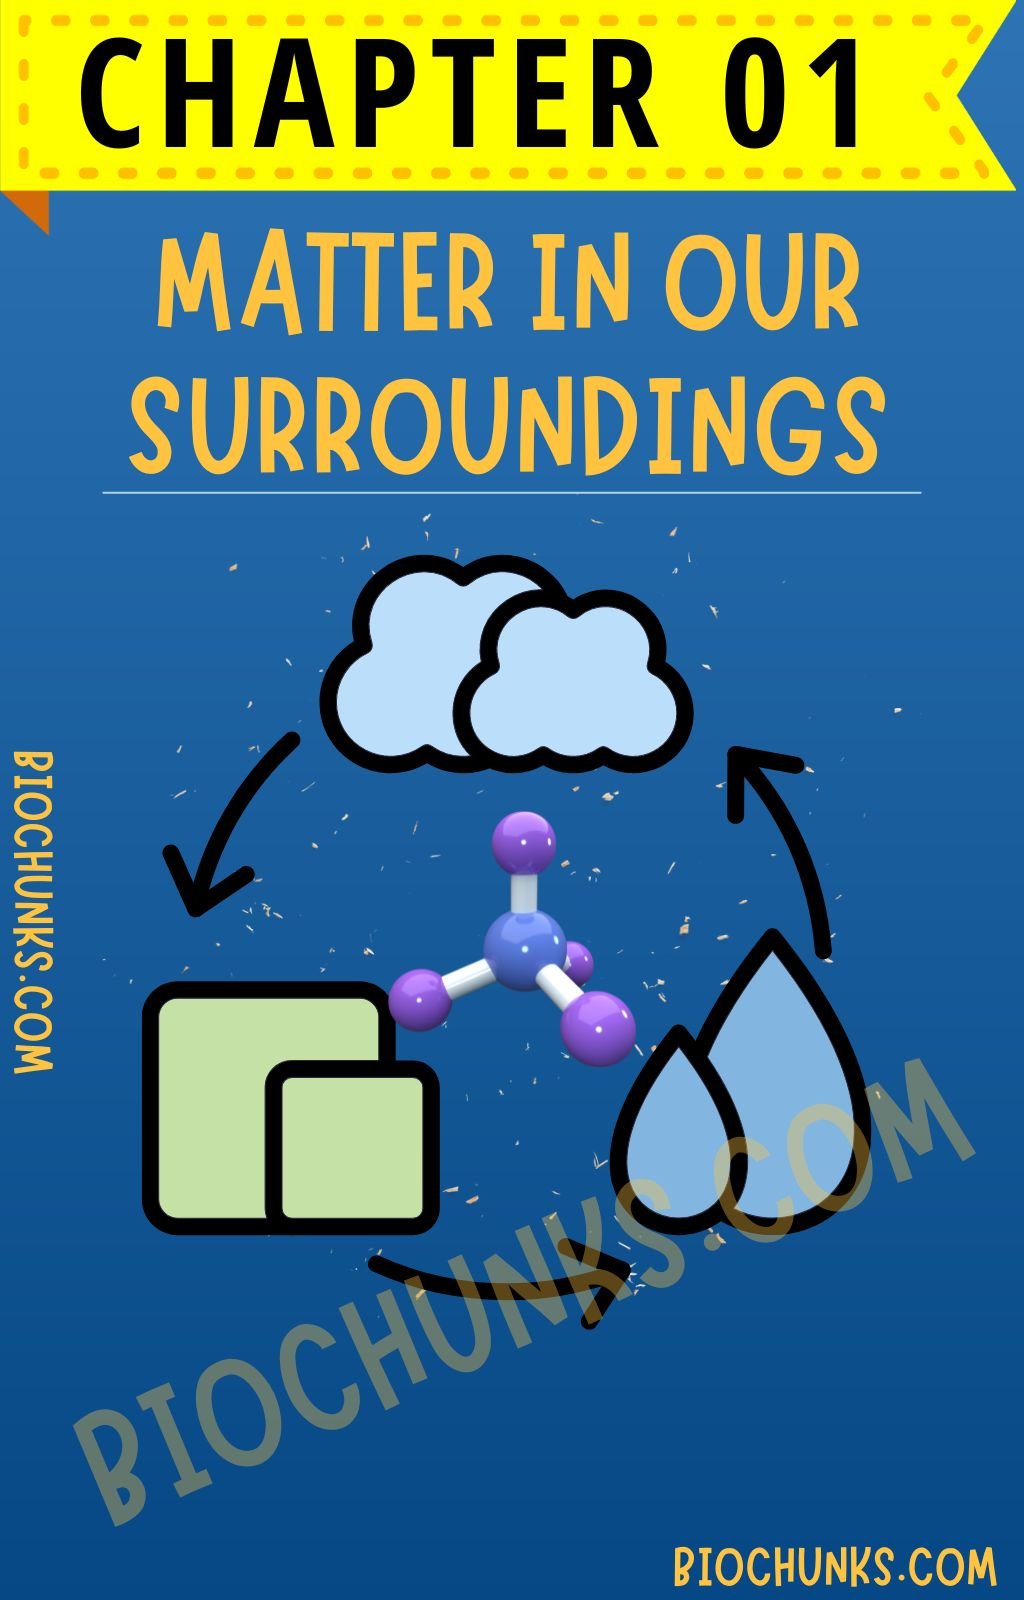 Matter in our surroundings Chapter 01 Class 9th biochunks.com